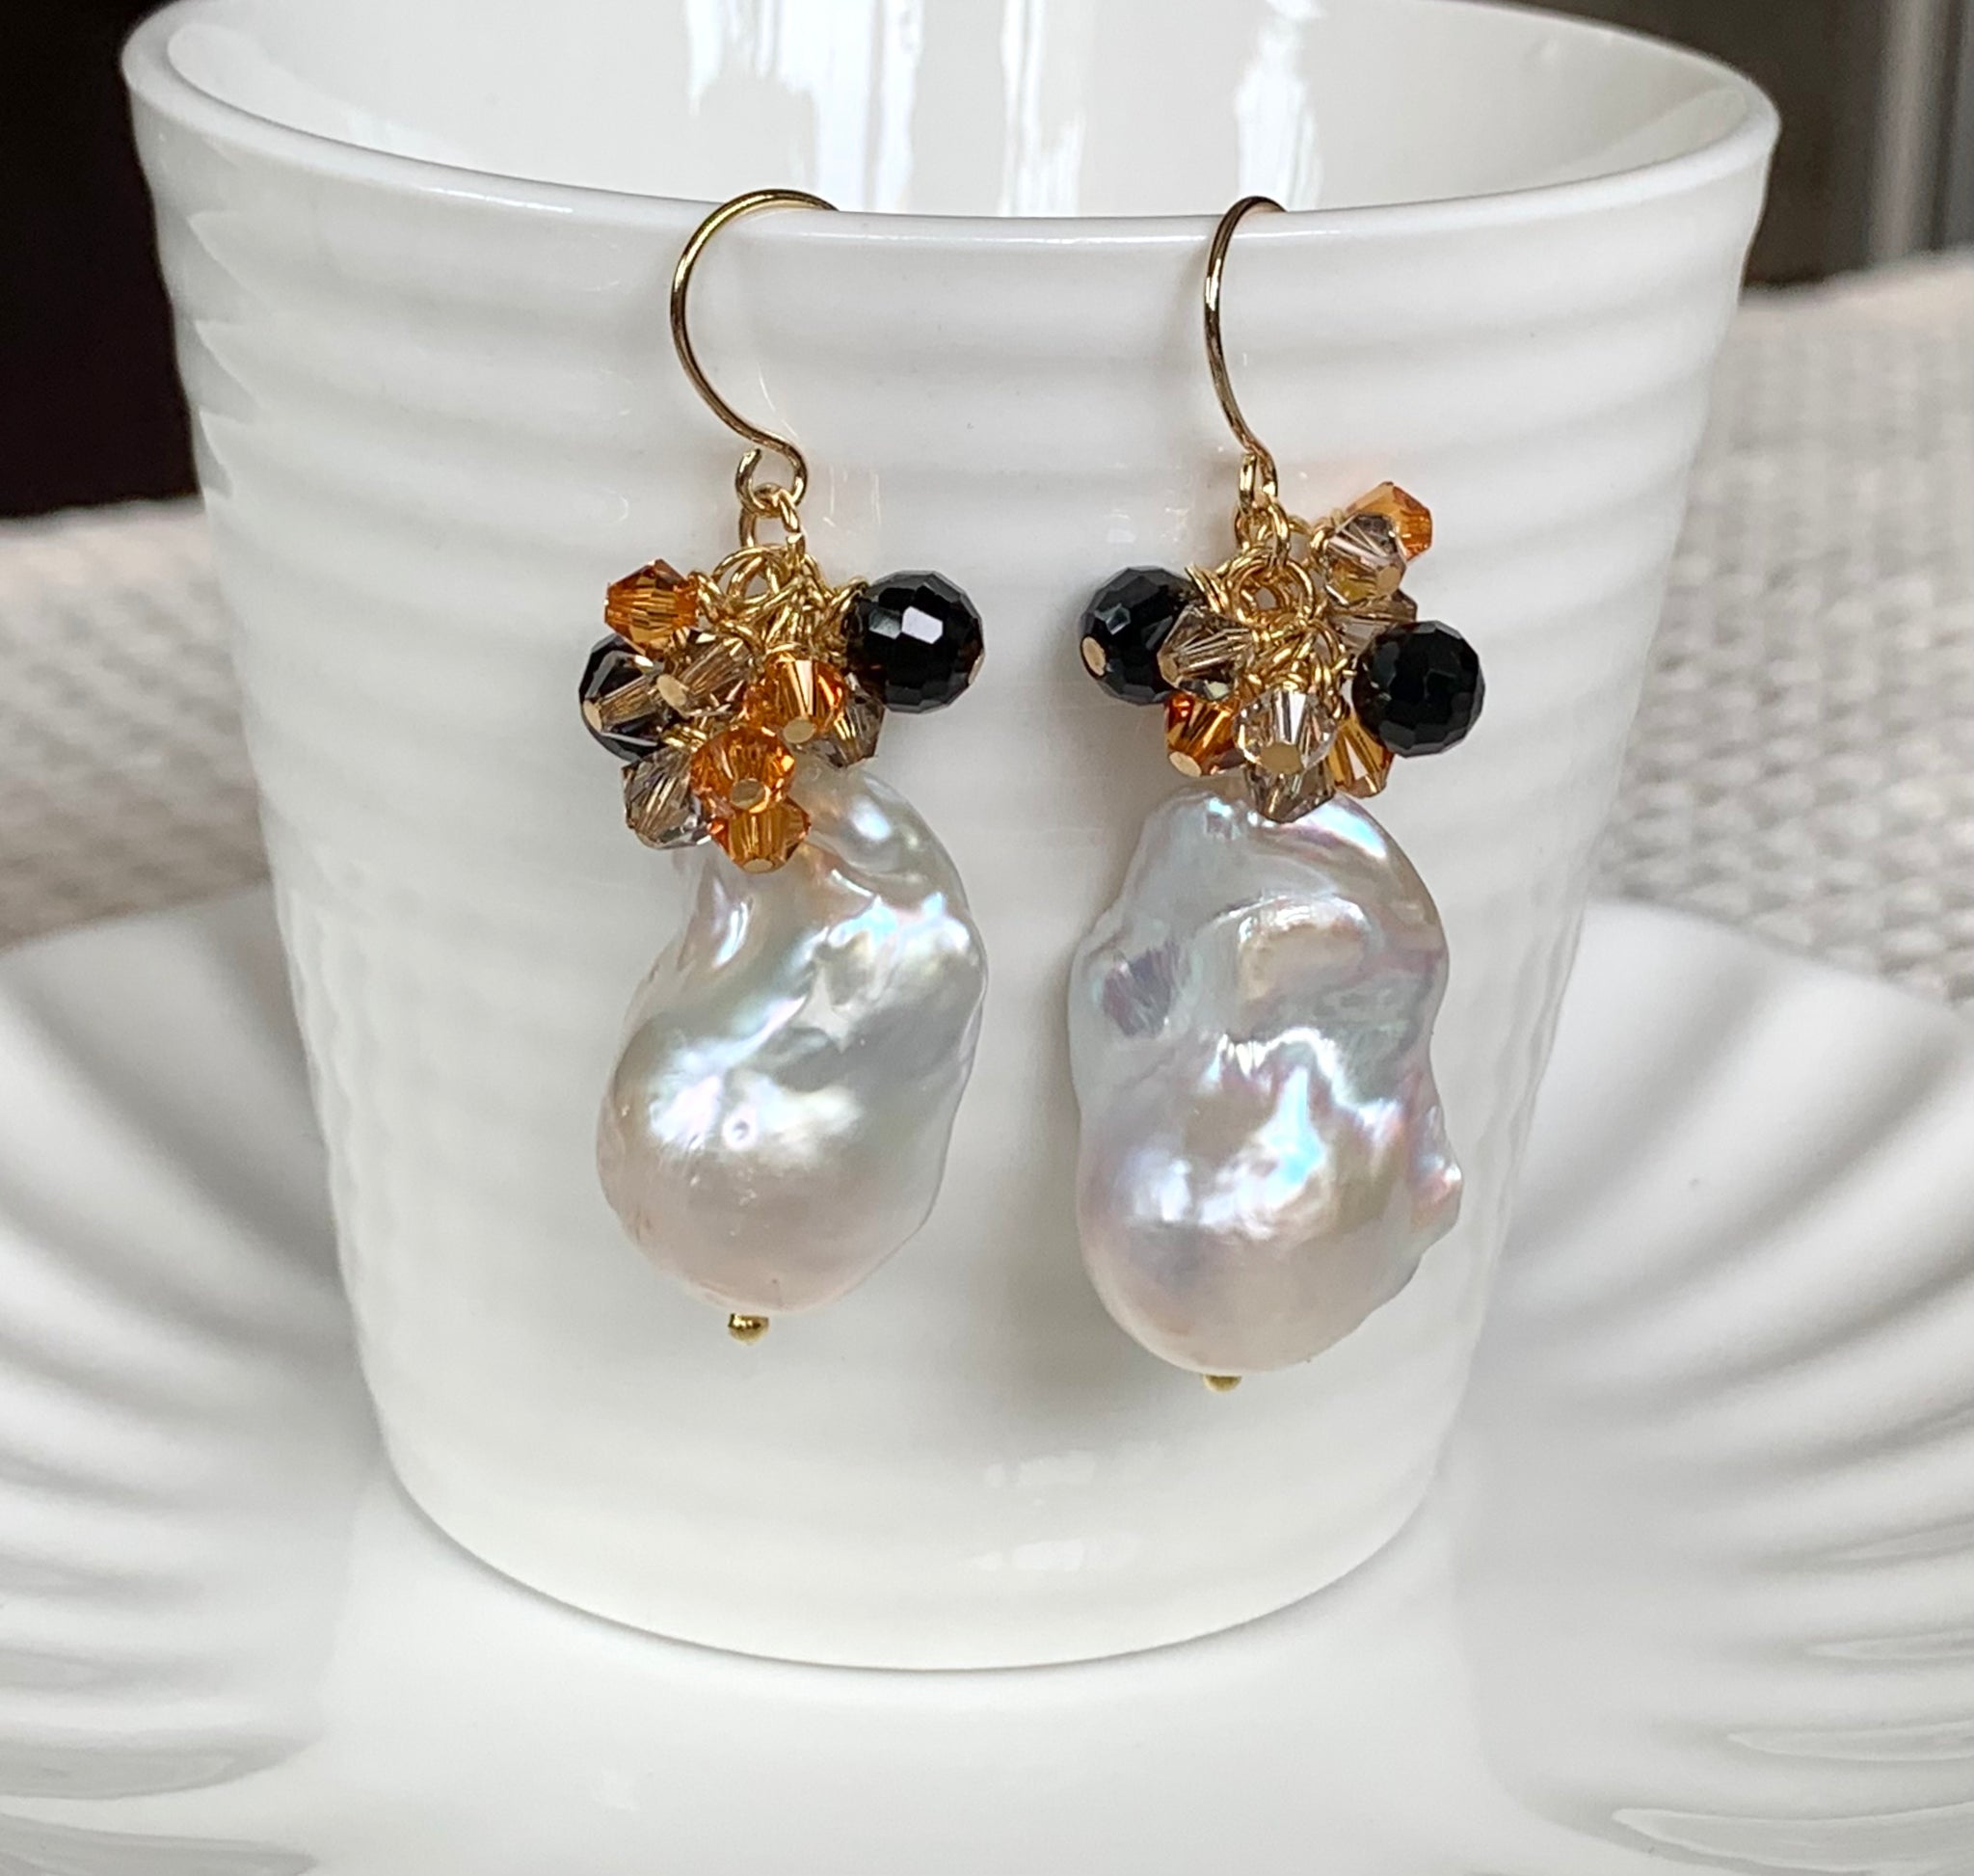 CHANEL Paris 1970's Gold Plated Pearl Crystal Cluster Earrings | eBay